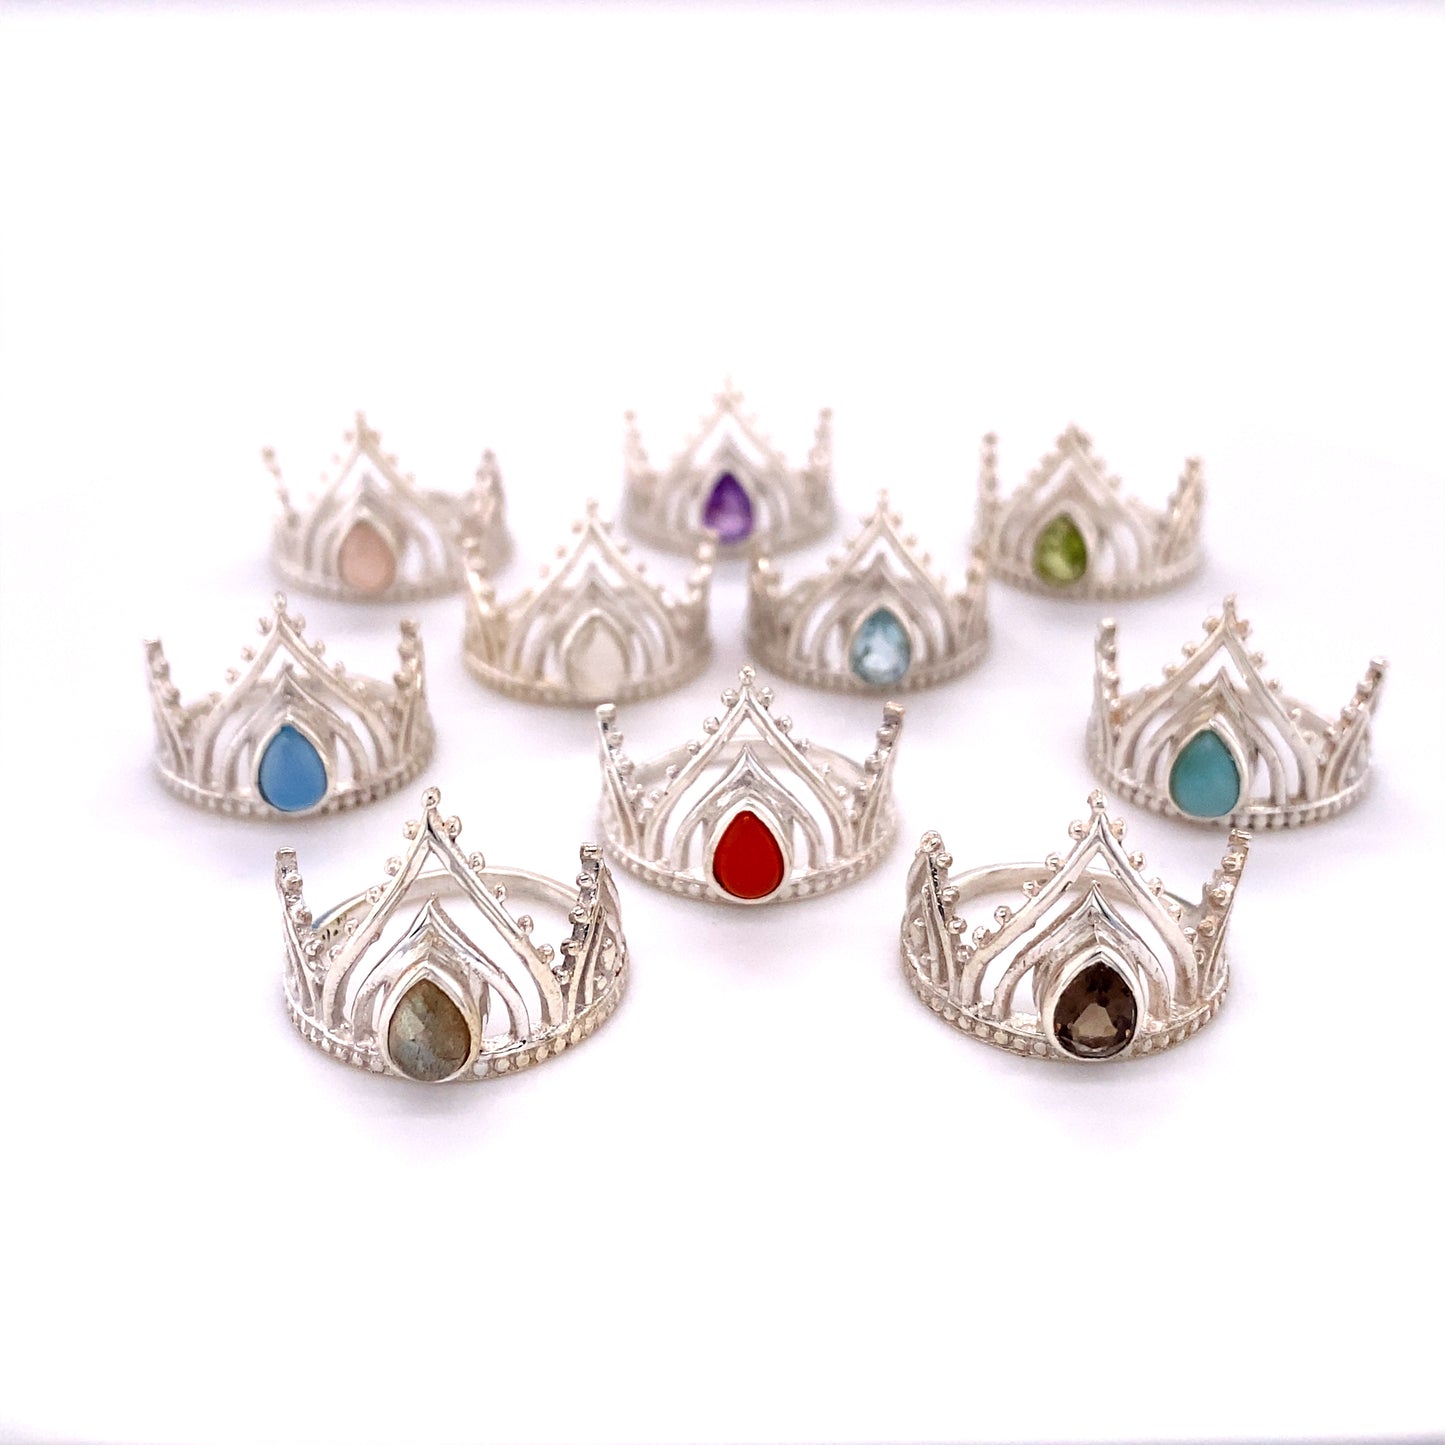 A set of Henna Crown Rings with Natural Gemstones, perfect for embracing your inner hippie vibes in Santa Cruz.